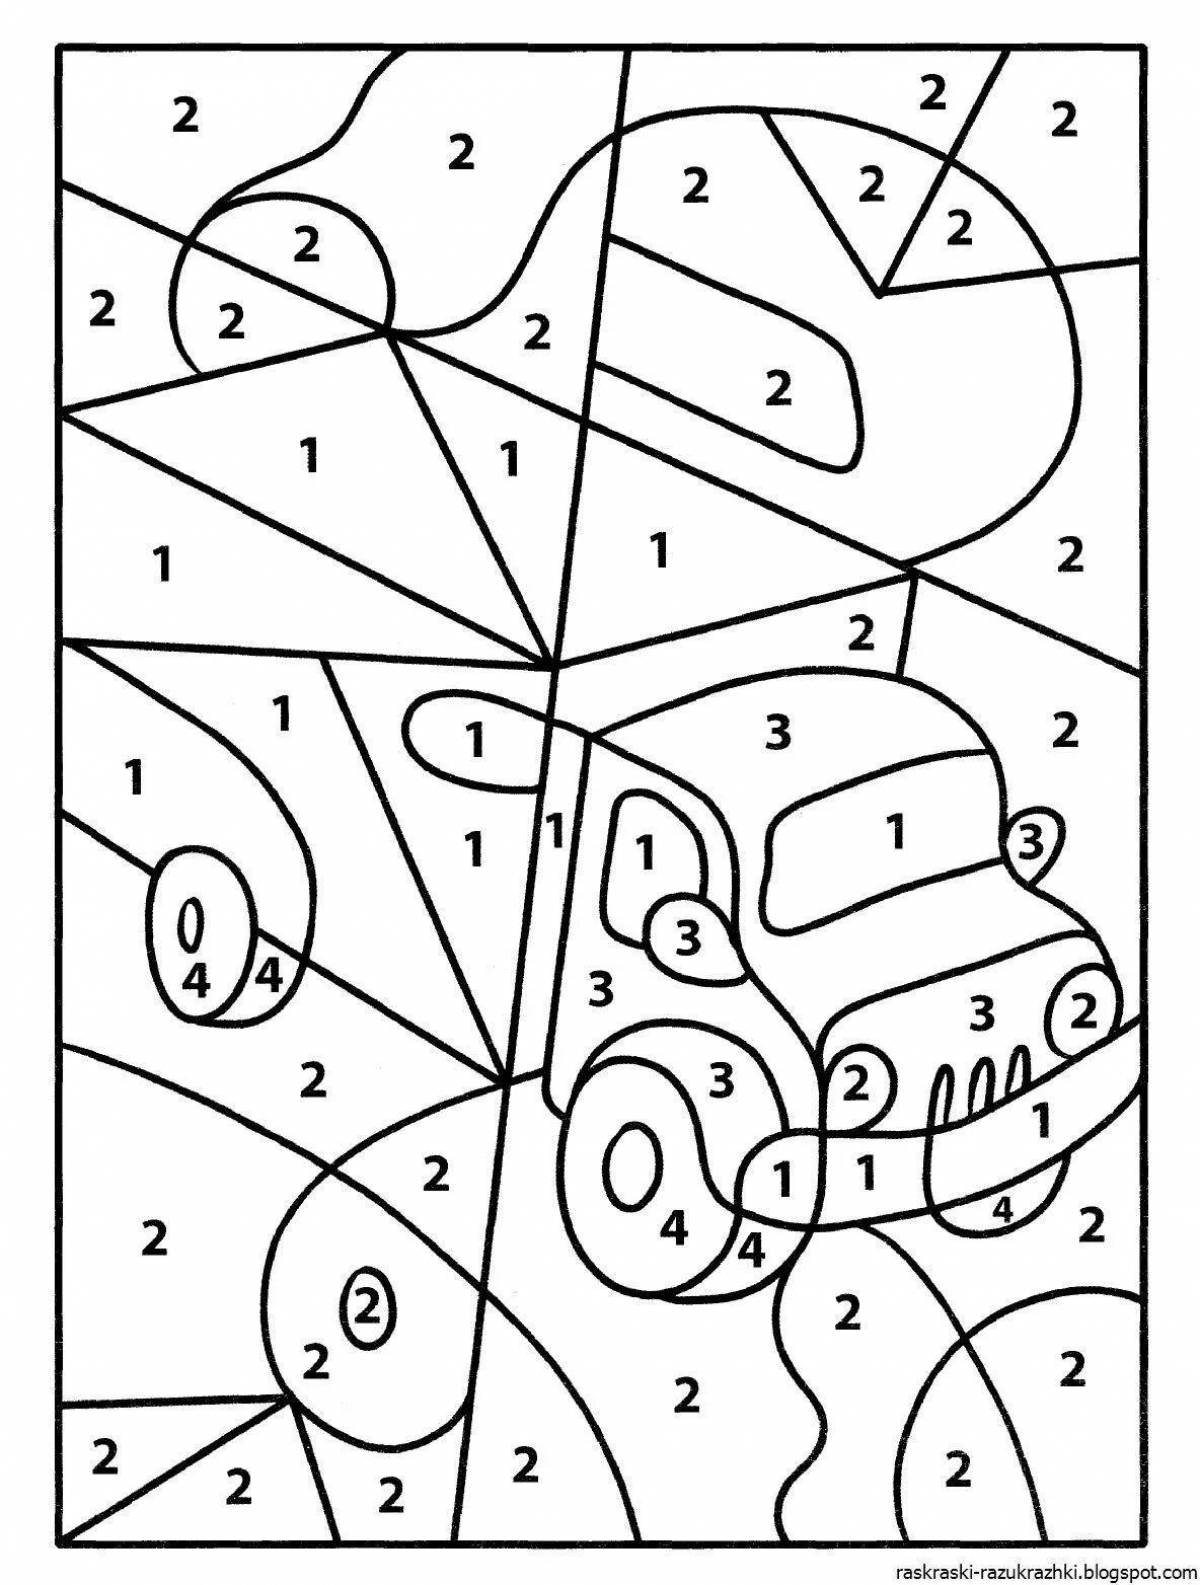 Fun coloring pages for 7 year olds